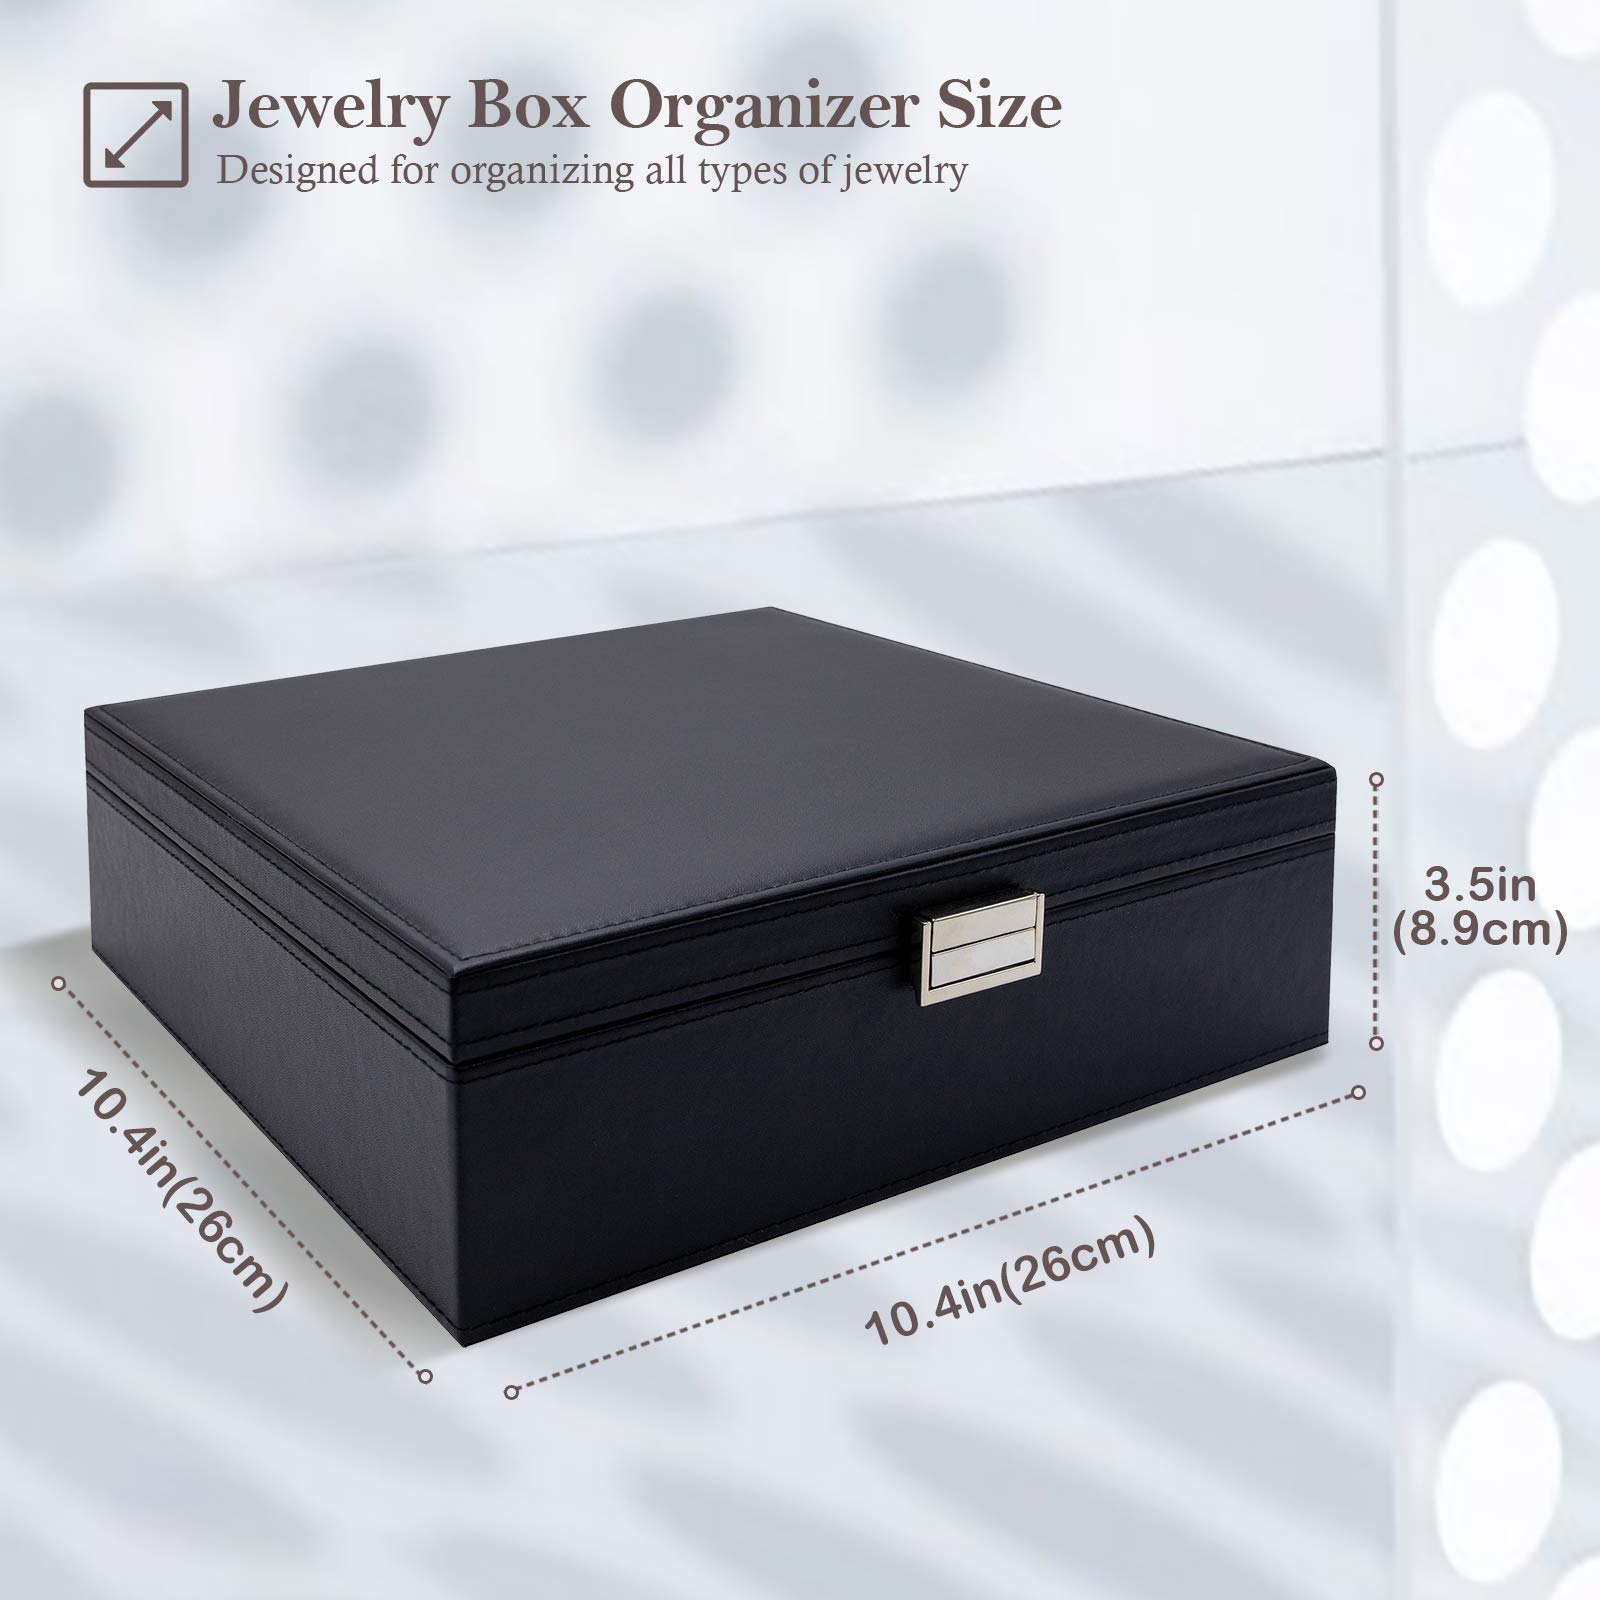 ProCase Jewelry Box for Women Girls, Large Leather Jewelry Organizer Storage Case with Two Layers Display for Earrings Bracelets Rings Watches -Black